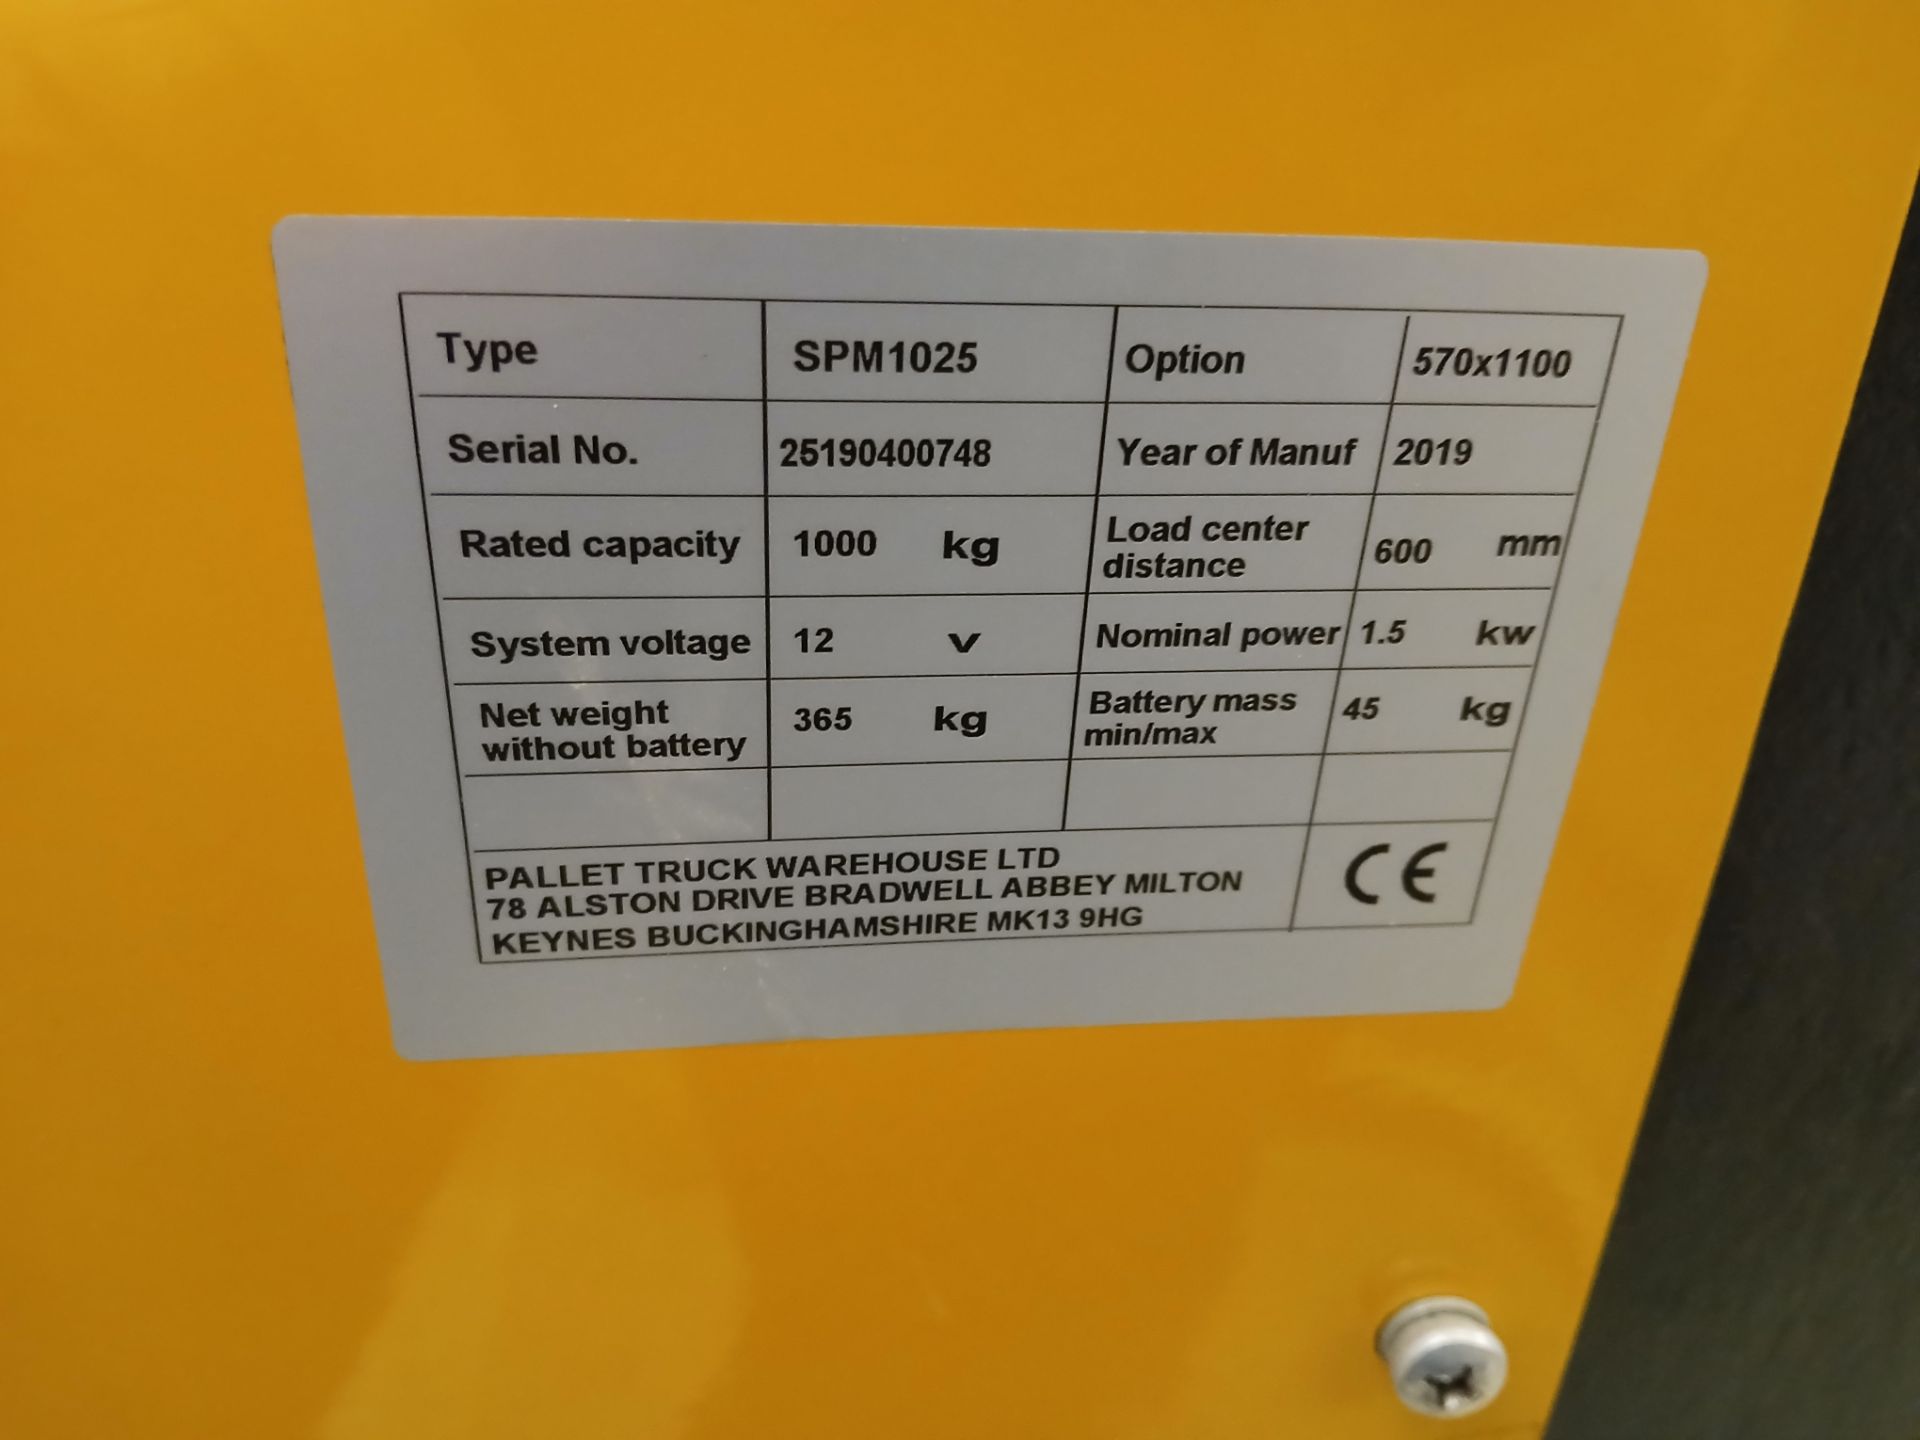 Unbadged SPM1025 Electric Pallet Truck, Year 2019, Serial Number 25190400748, Rated Capacity - Image 4 of 7